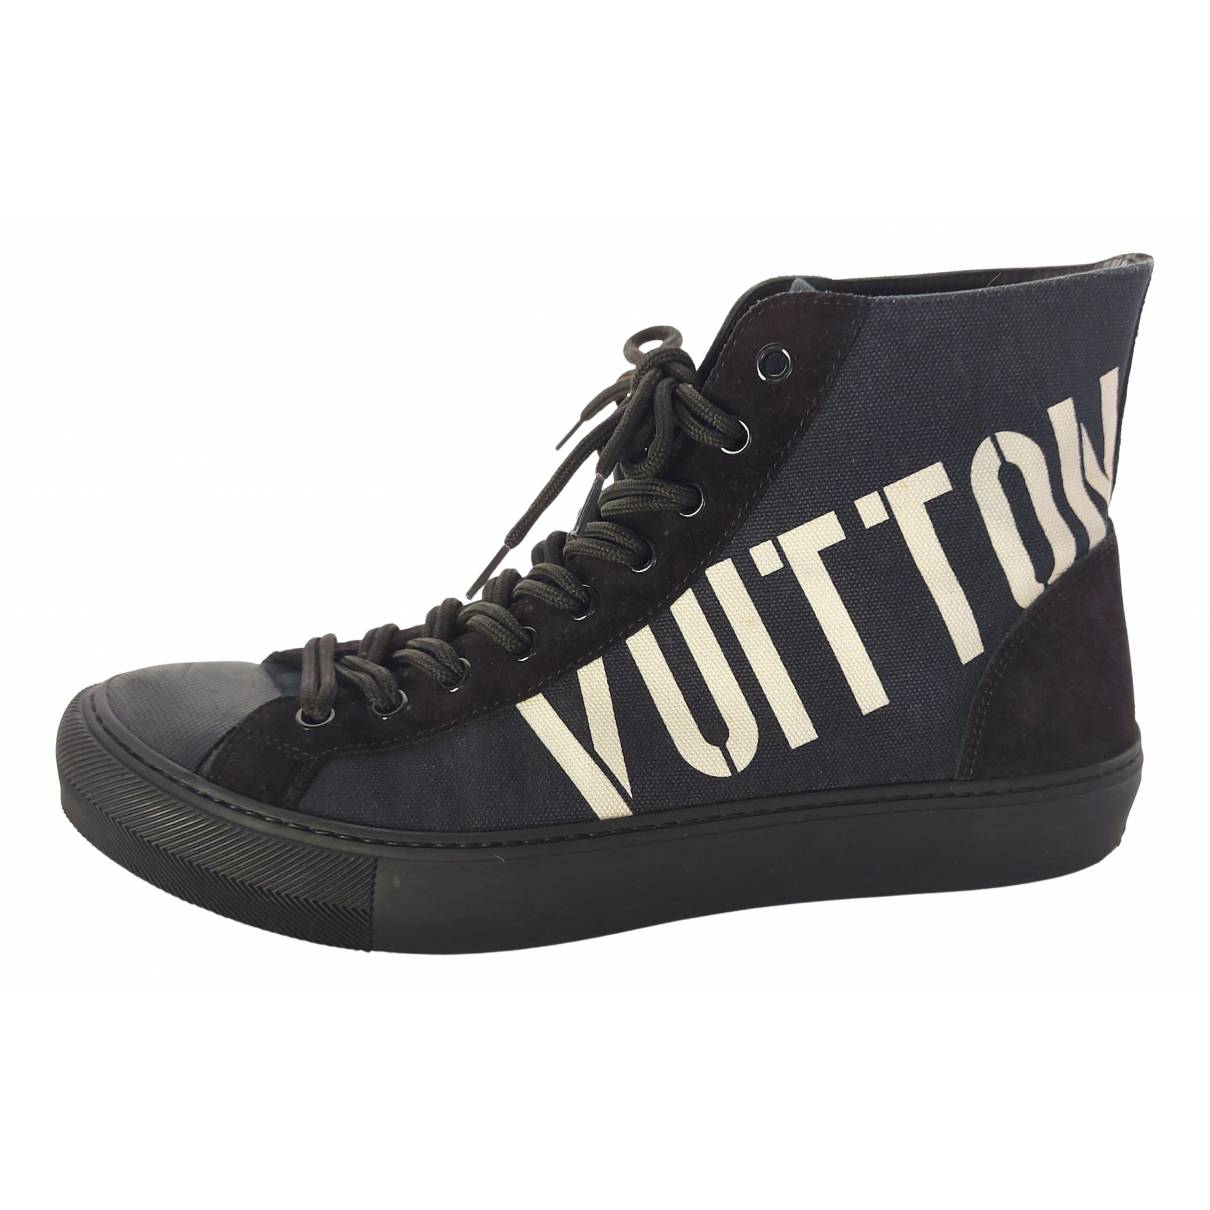 Tattoo cloth high trainers Louis Vuitton Black size 6 UK in Cloth